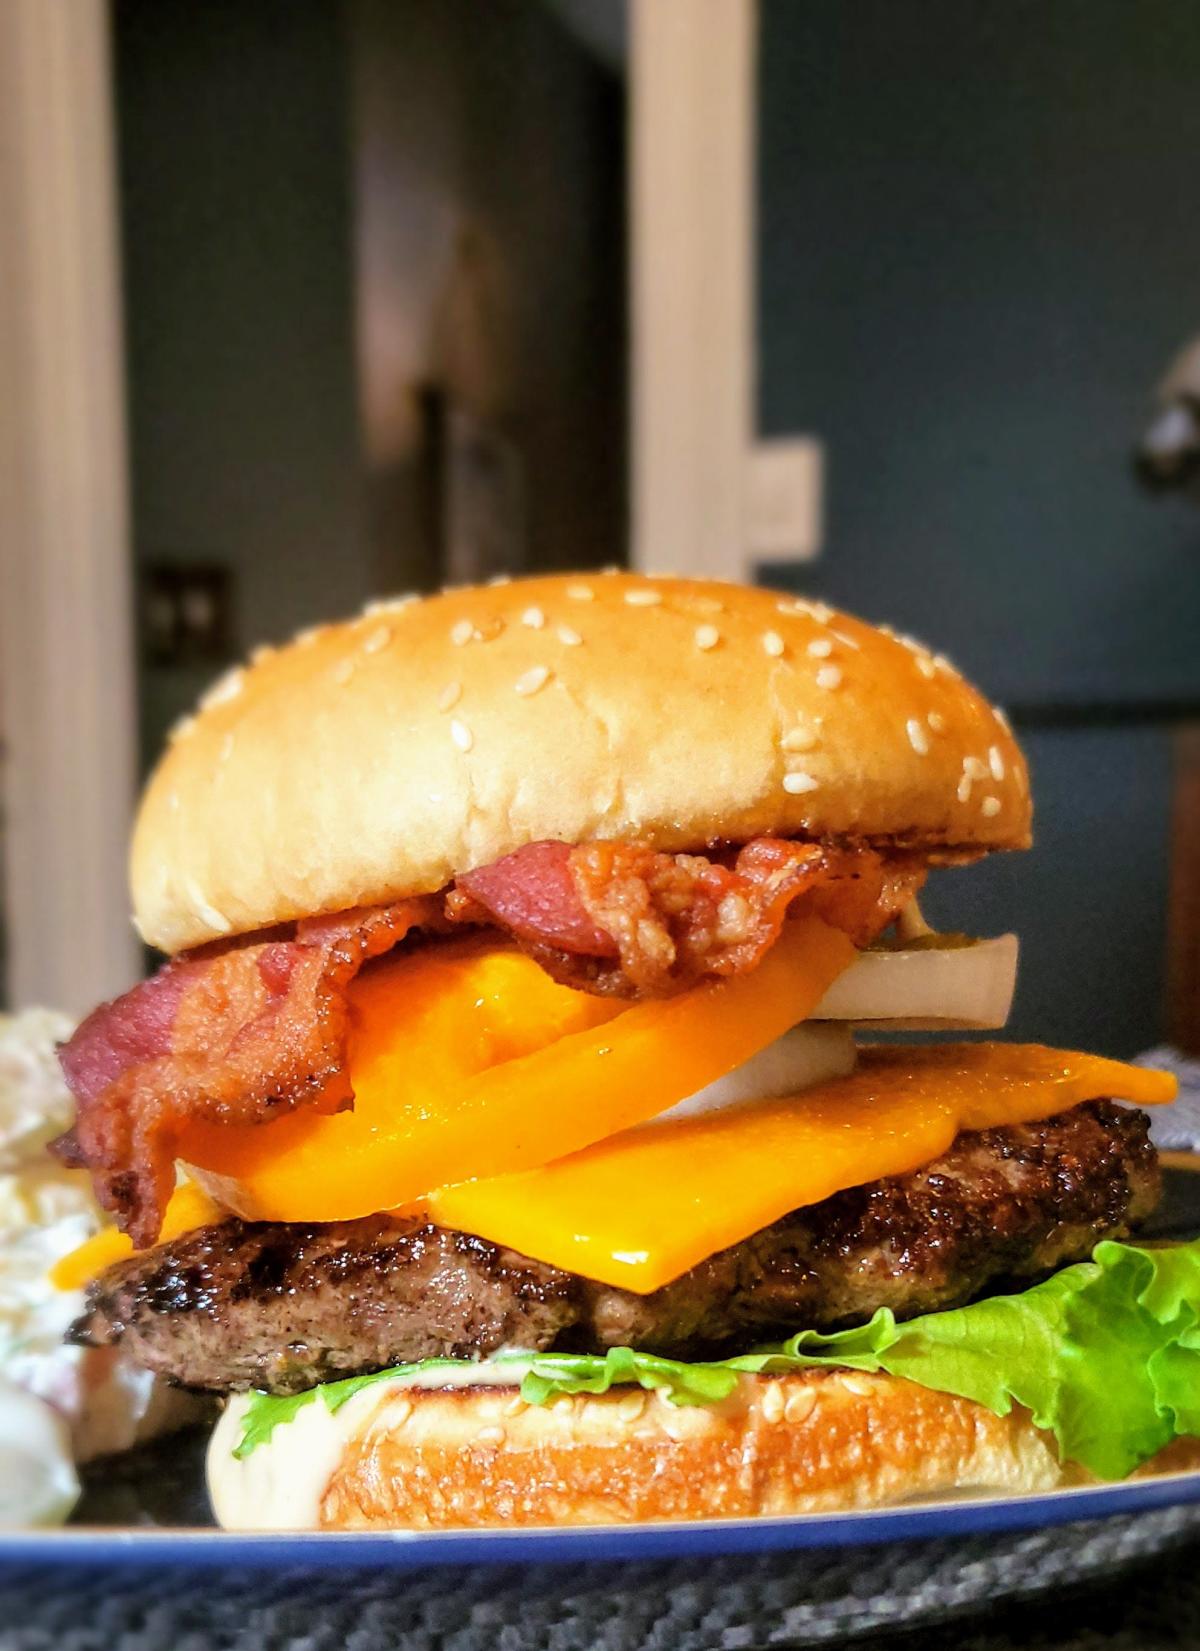 Just in time for National Cheeseburger Day, here's how to make the